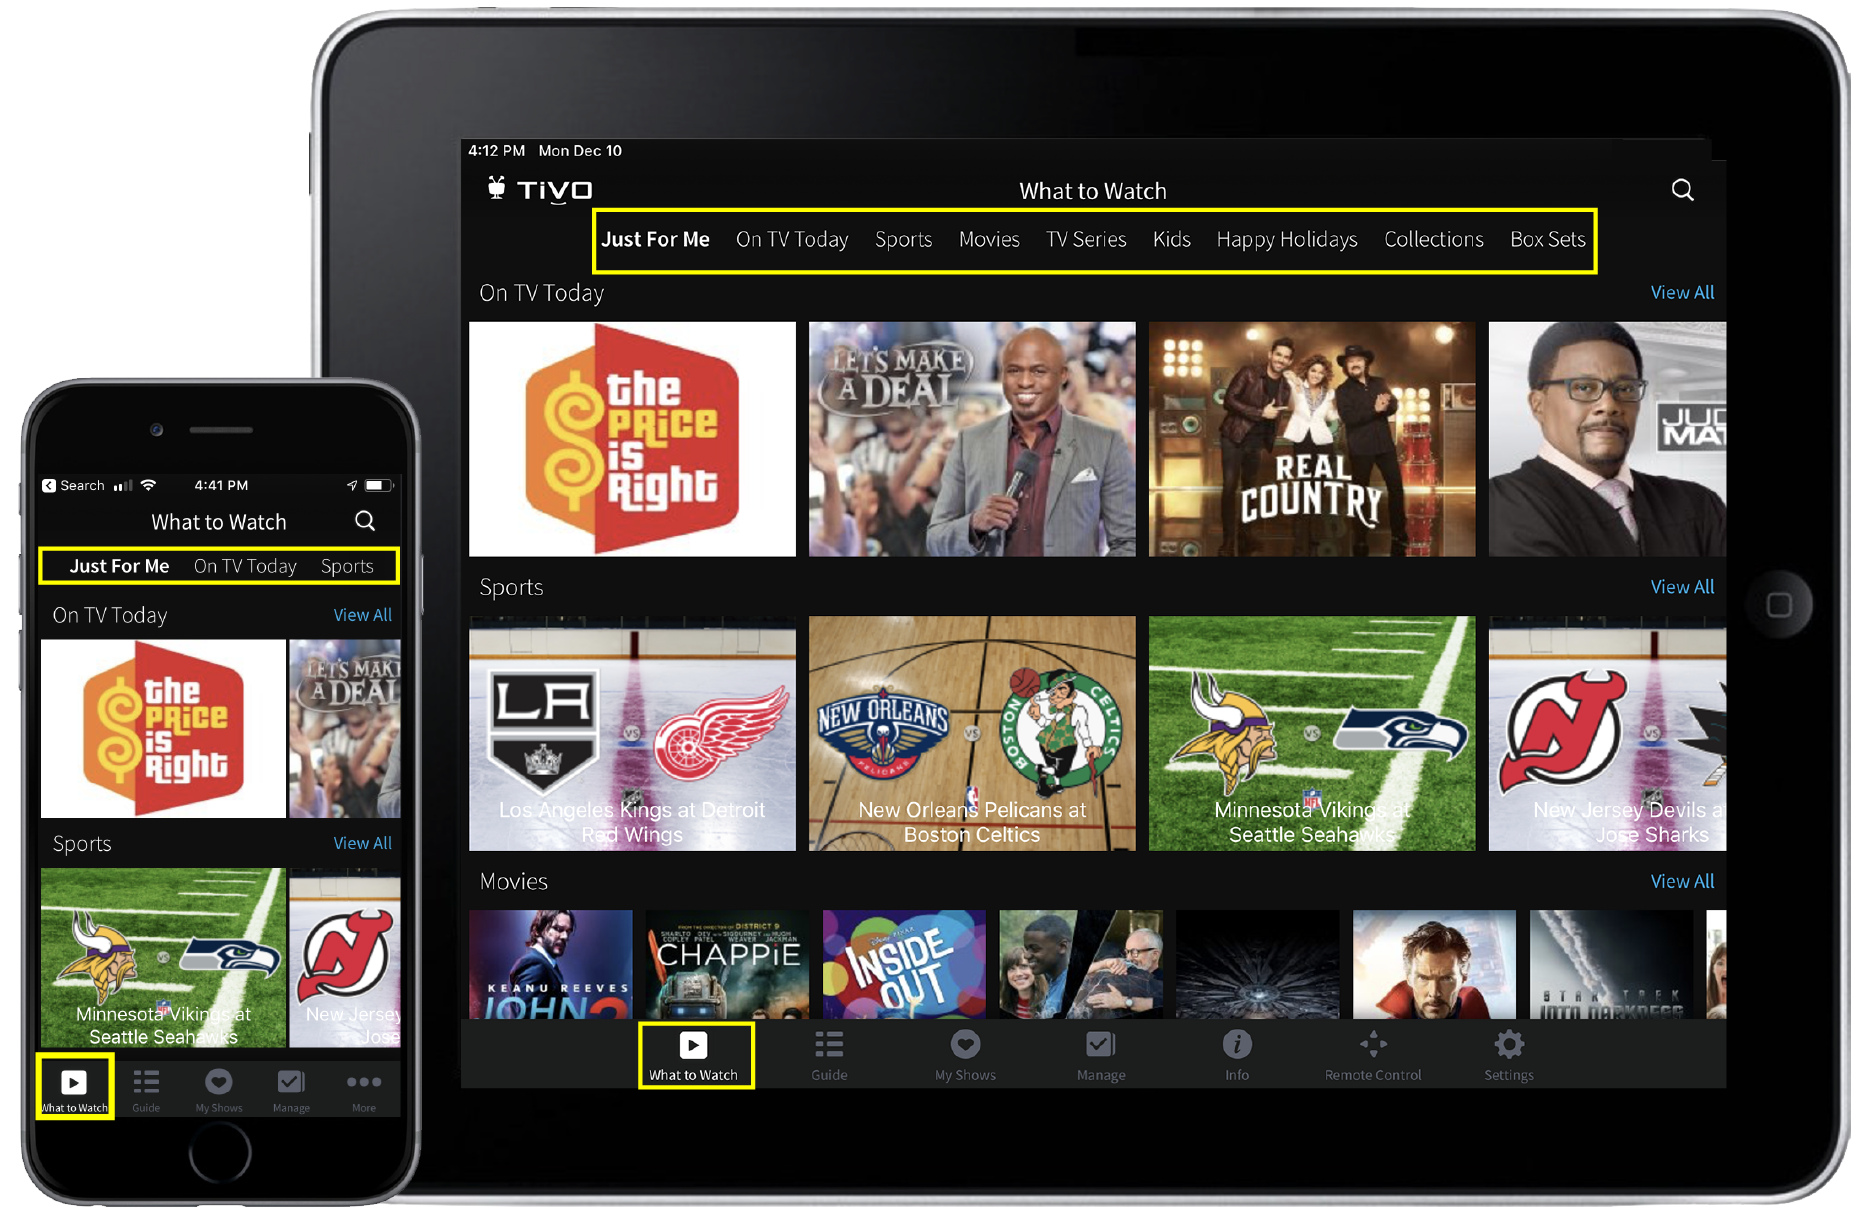 tivo-app-what-to-watch